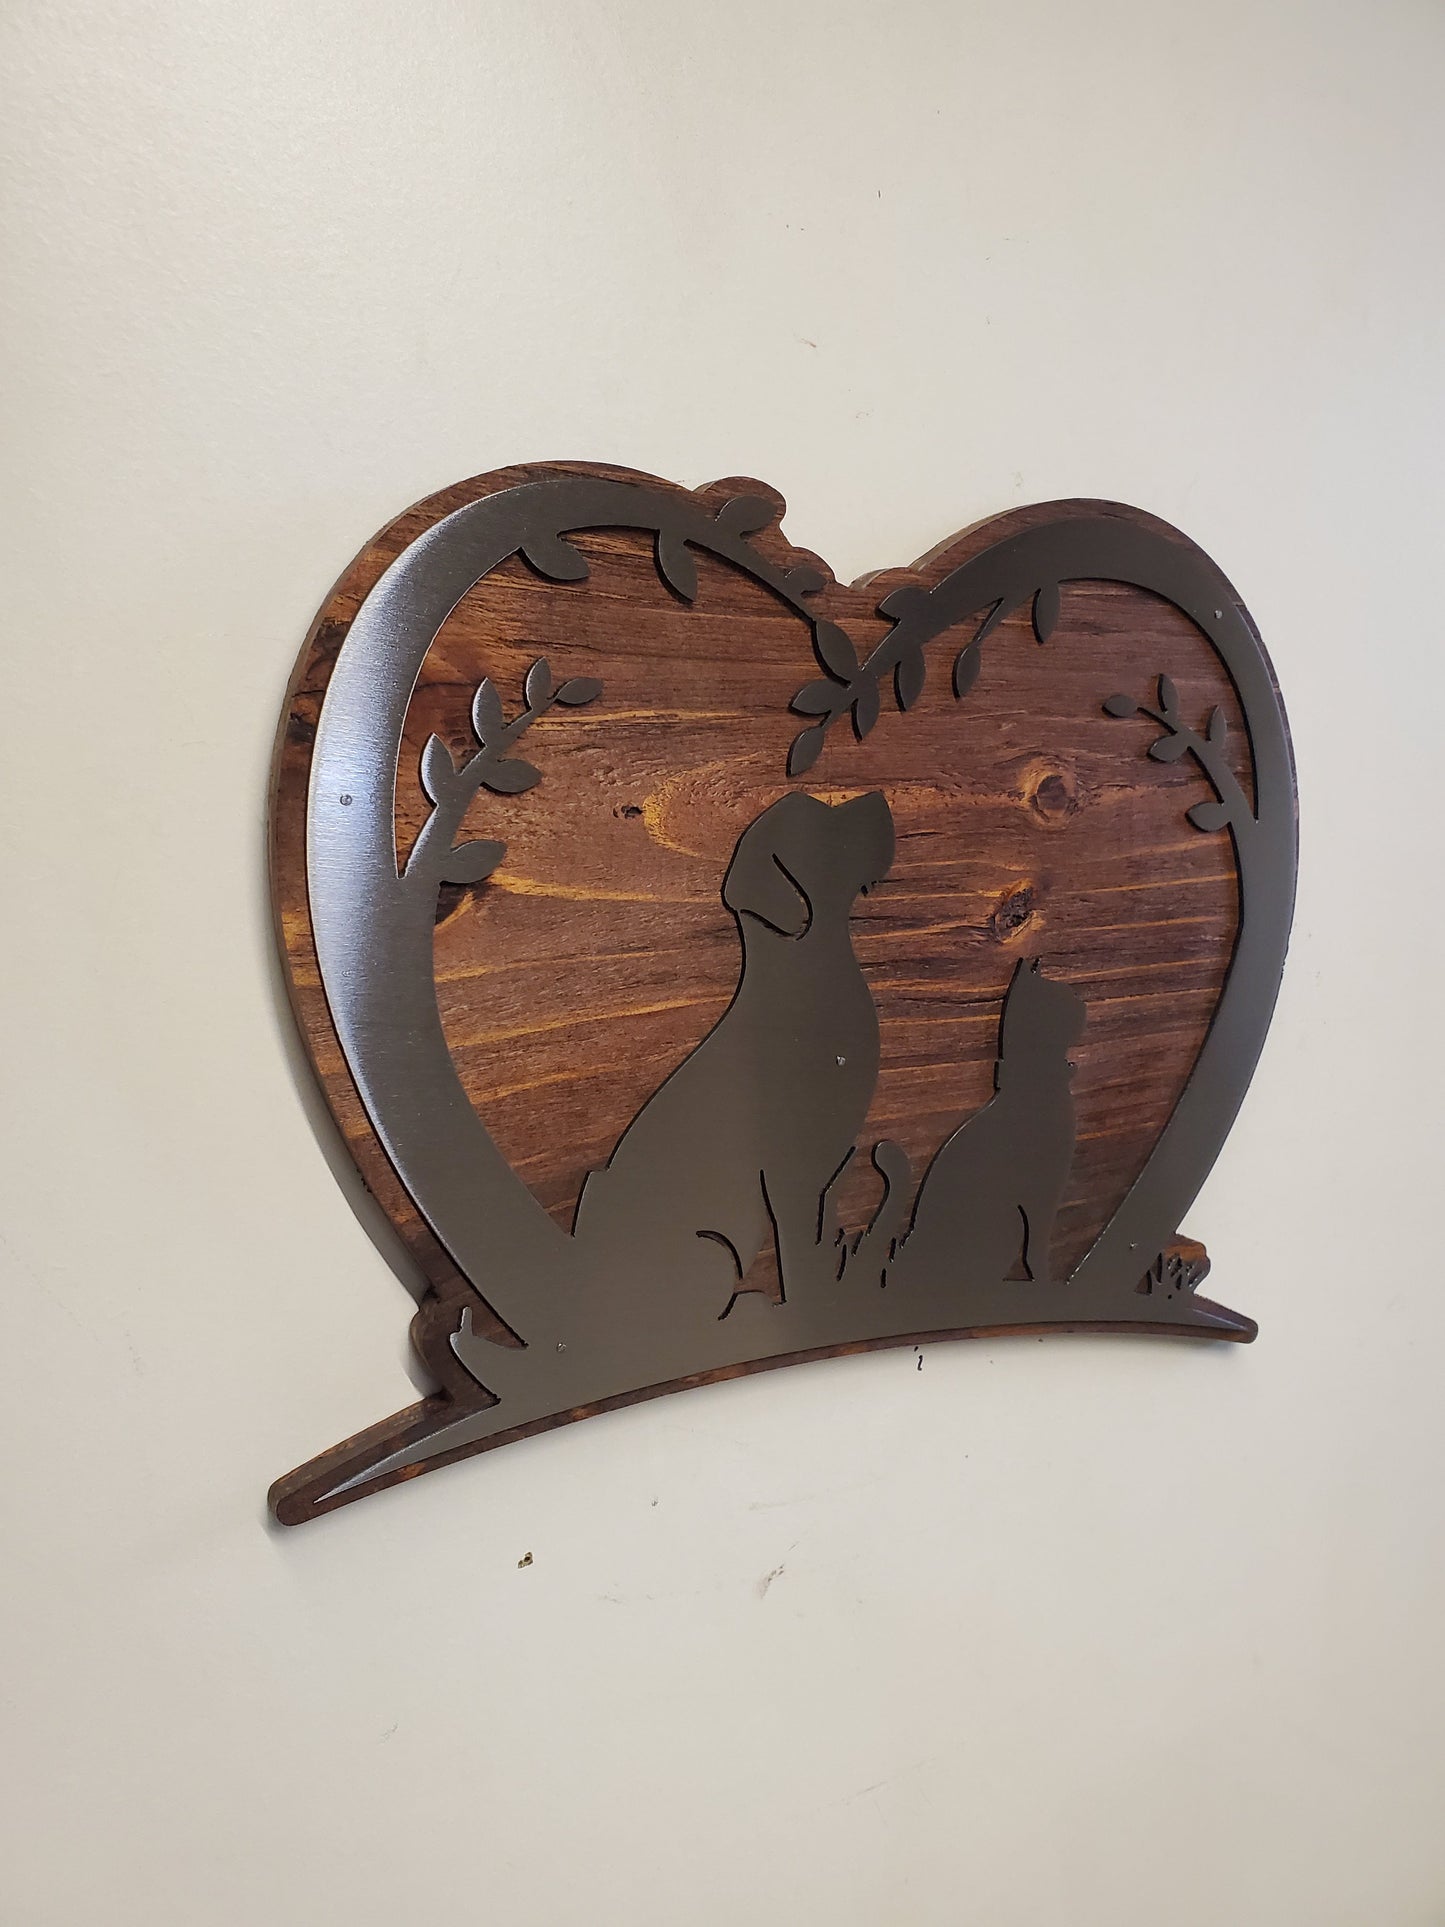 Dog and Cat in a Heart Metal Art on Wood